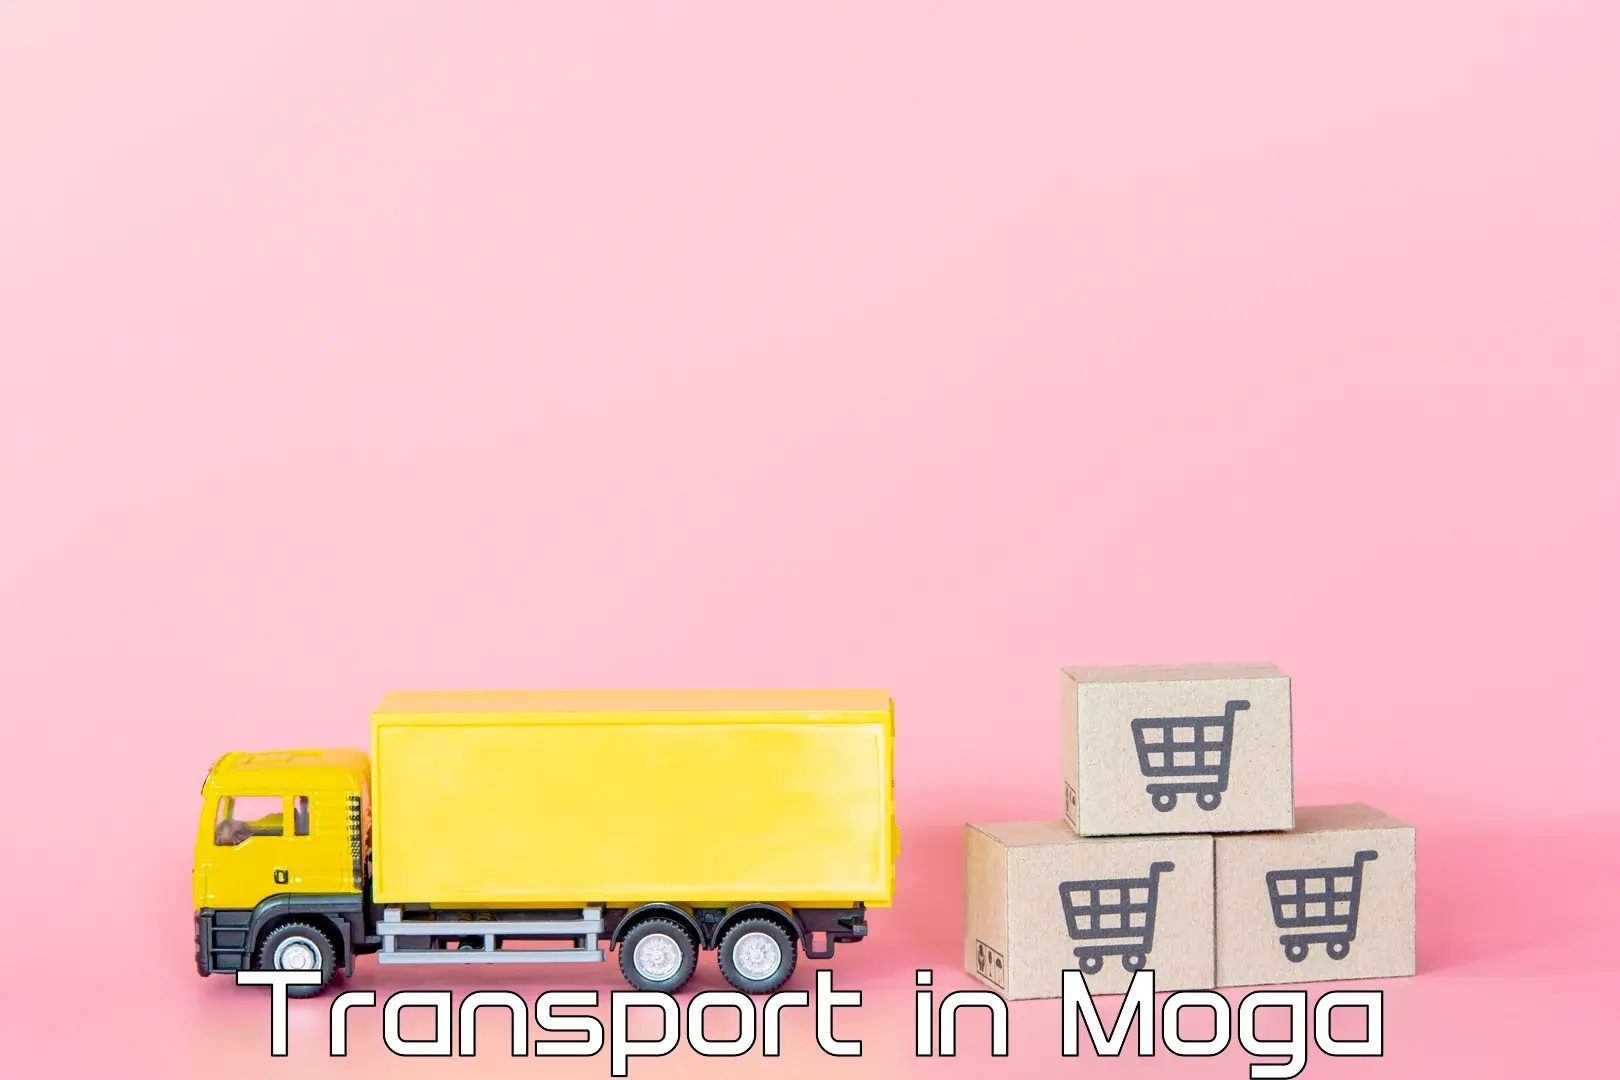 Nationwide transport services in Moga